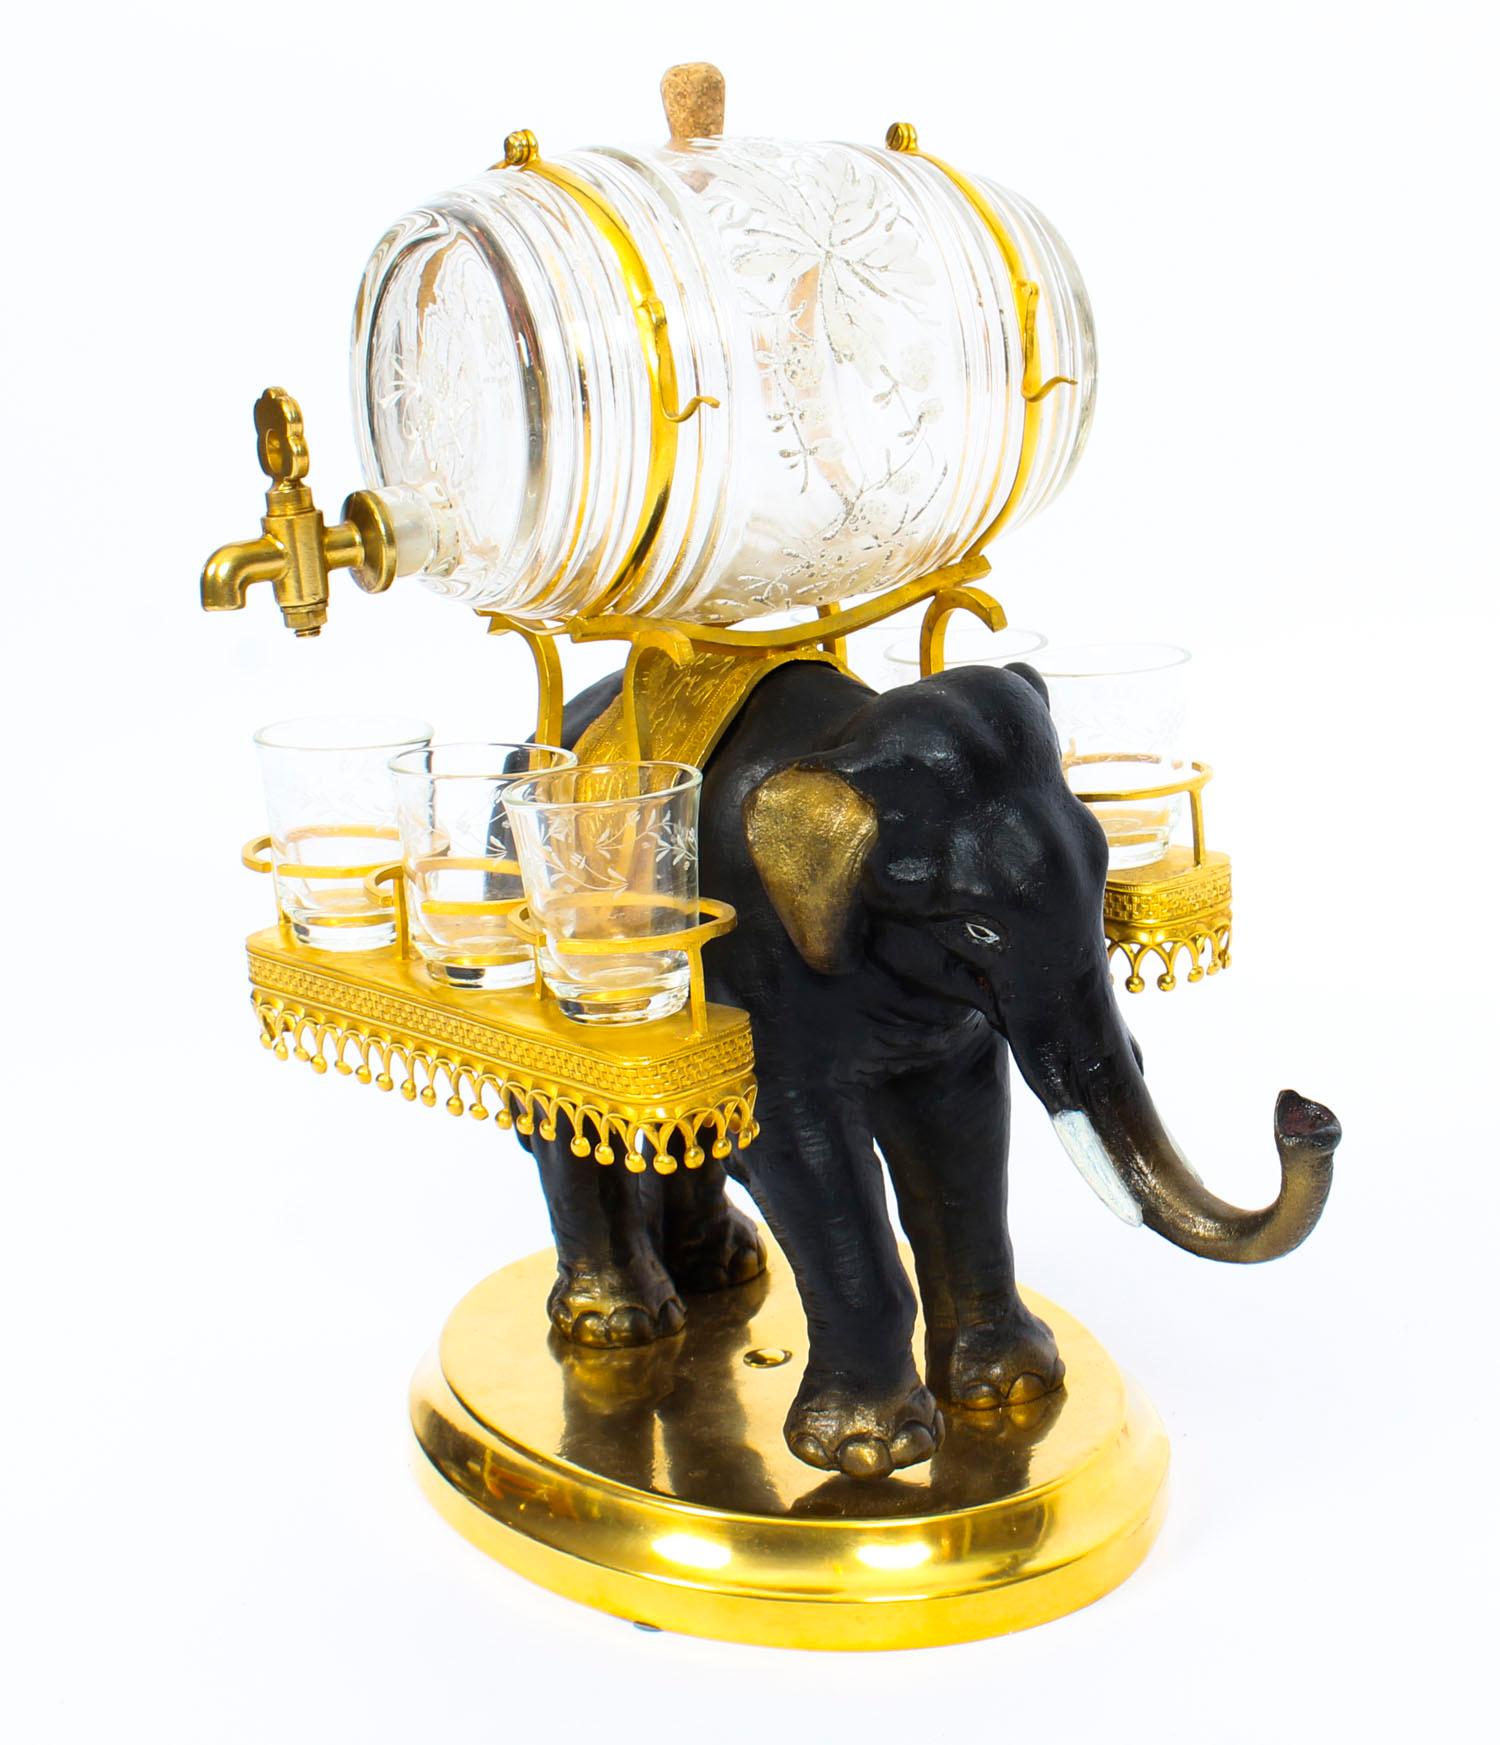 This is an extremely fine neoclassical French ornamental cast bronze, ormolu and glass liqueur set, circa 1840 in date.

This fabulous liqueur set is in the form of a finely patinated bronze sculpture of an elephant walking along and carrying an